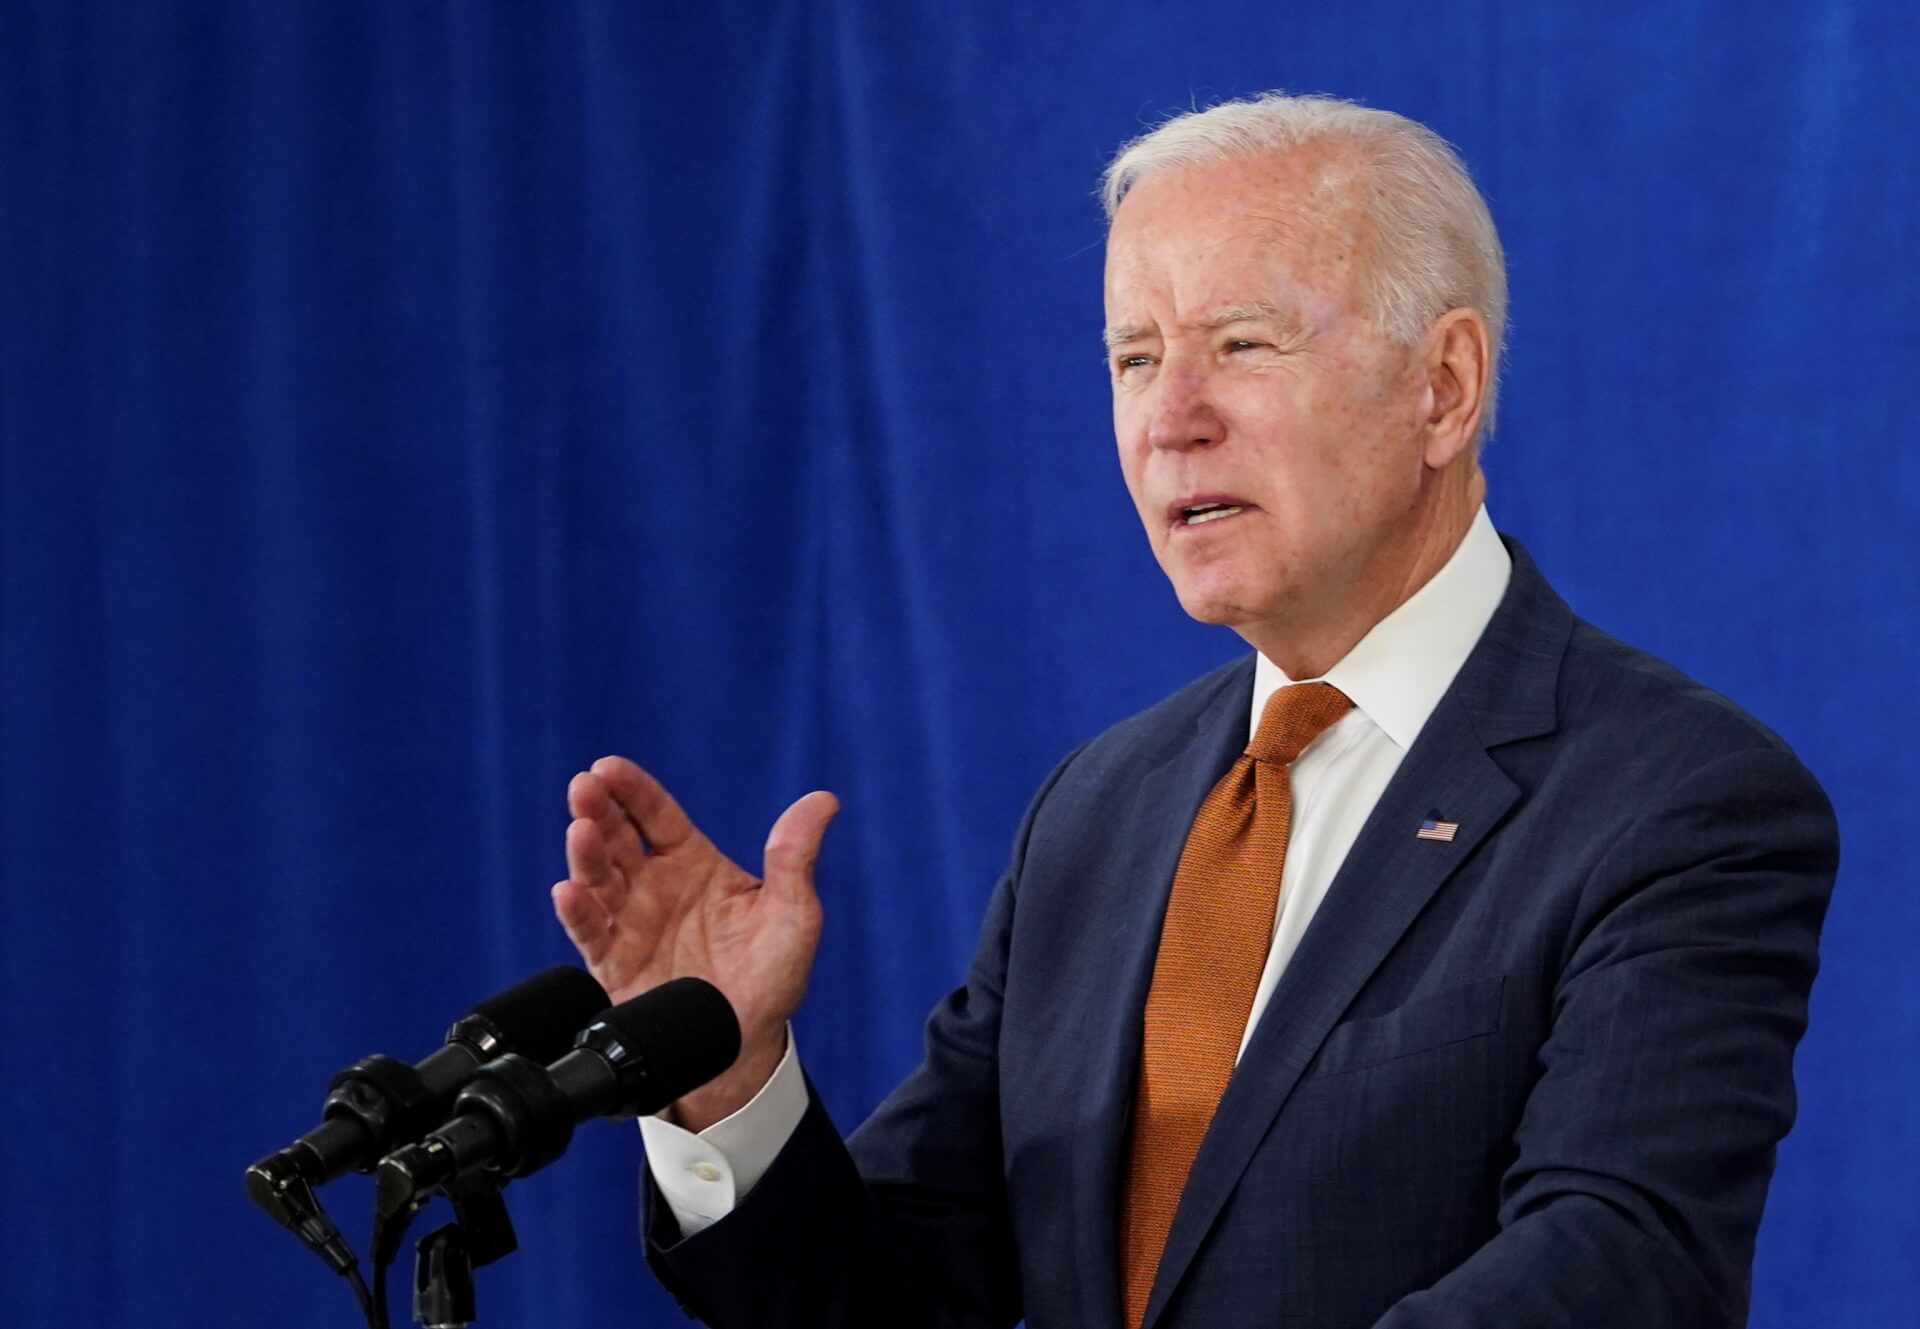 Biden All But Confirms 2024 Re-Election Bid, Says Trump Running Would “Increase Prospect”